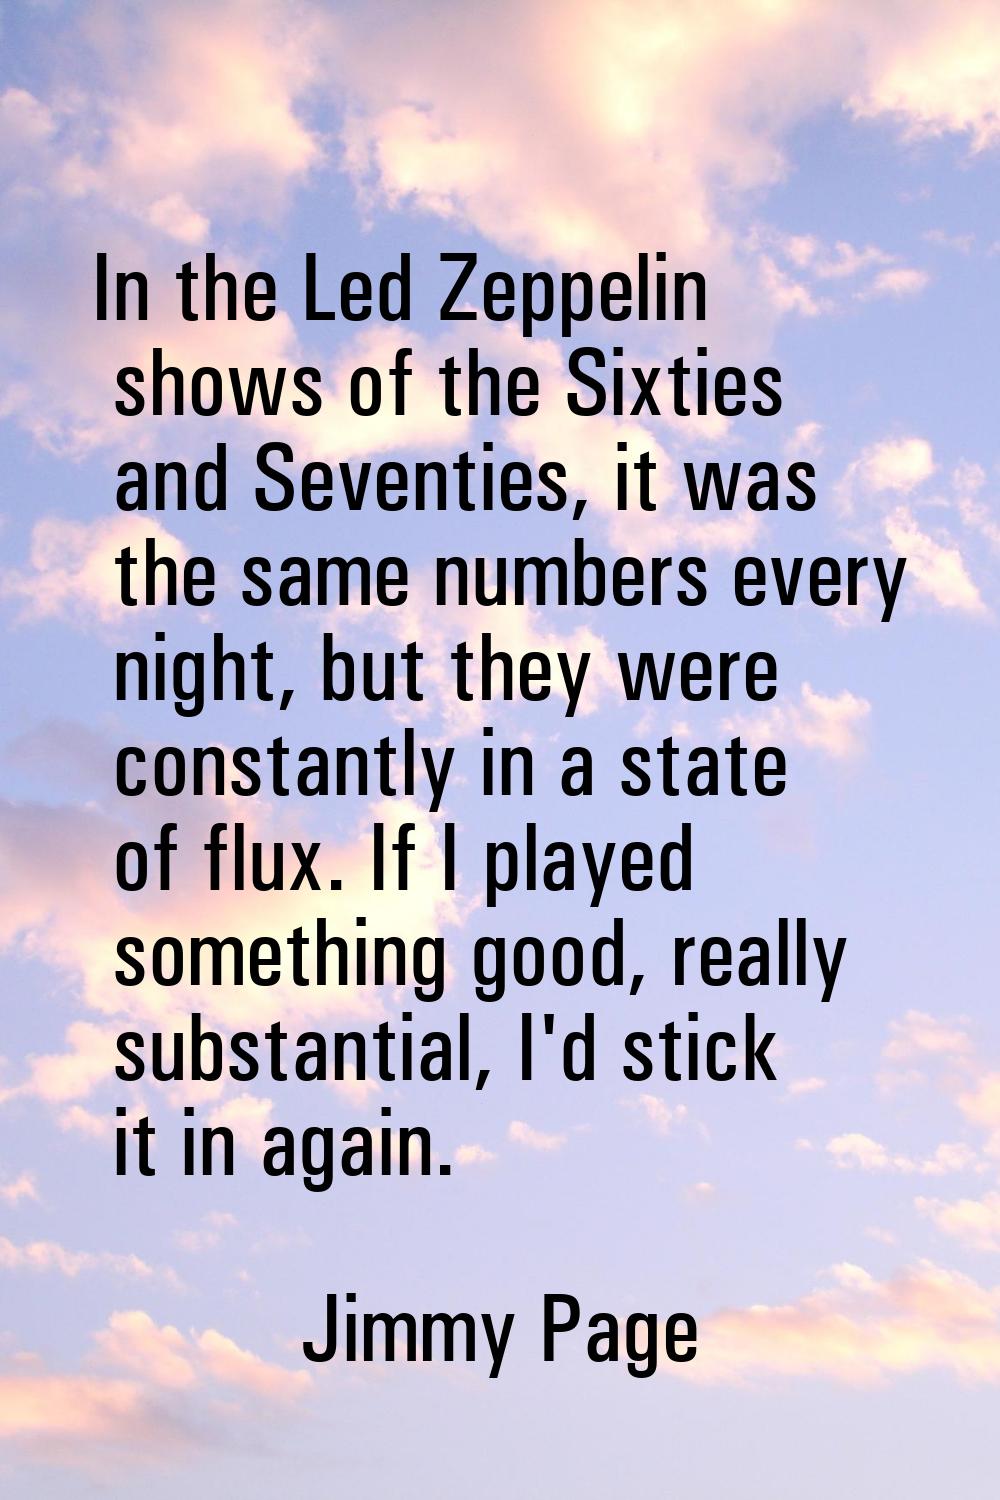 In the Led Zeppelin shows of the Sixties and Seventies, it was the same numbers every night, but th